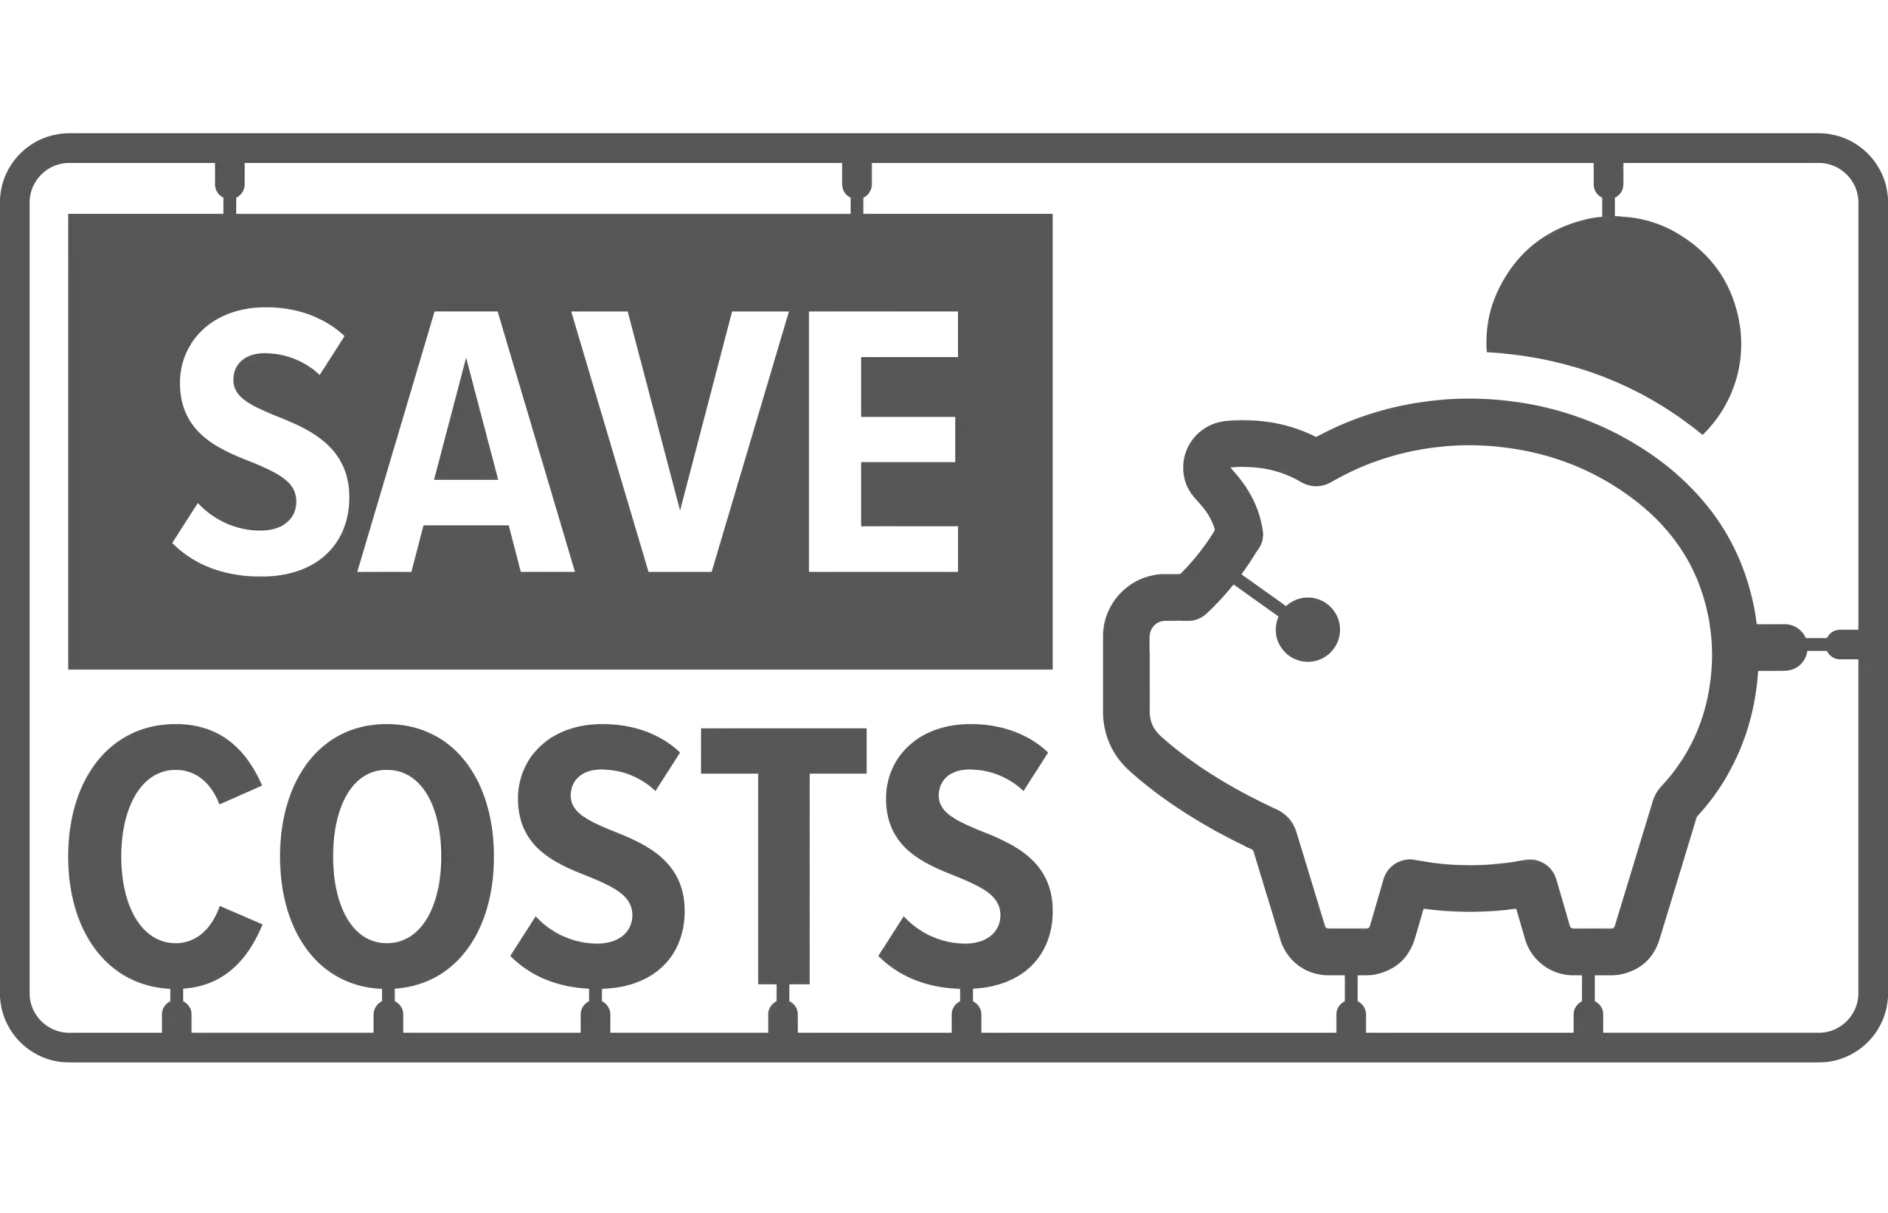 Save costs